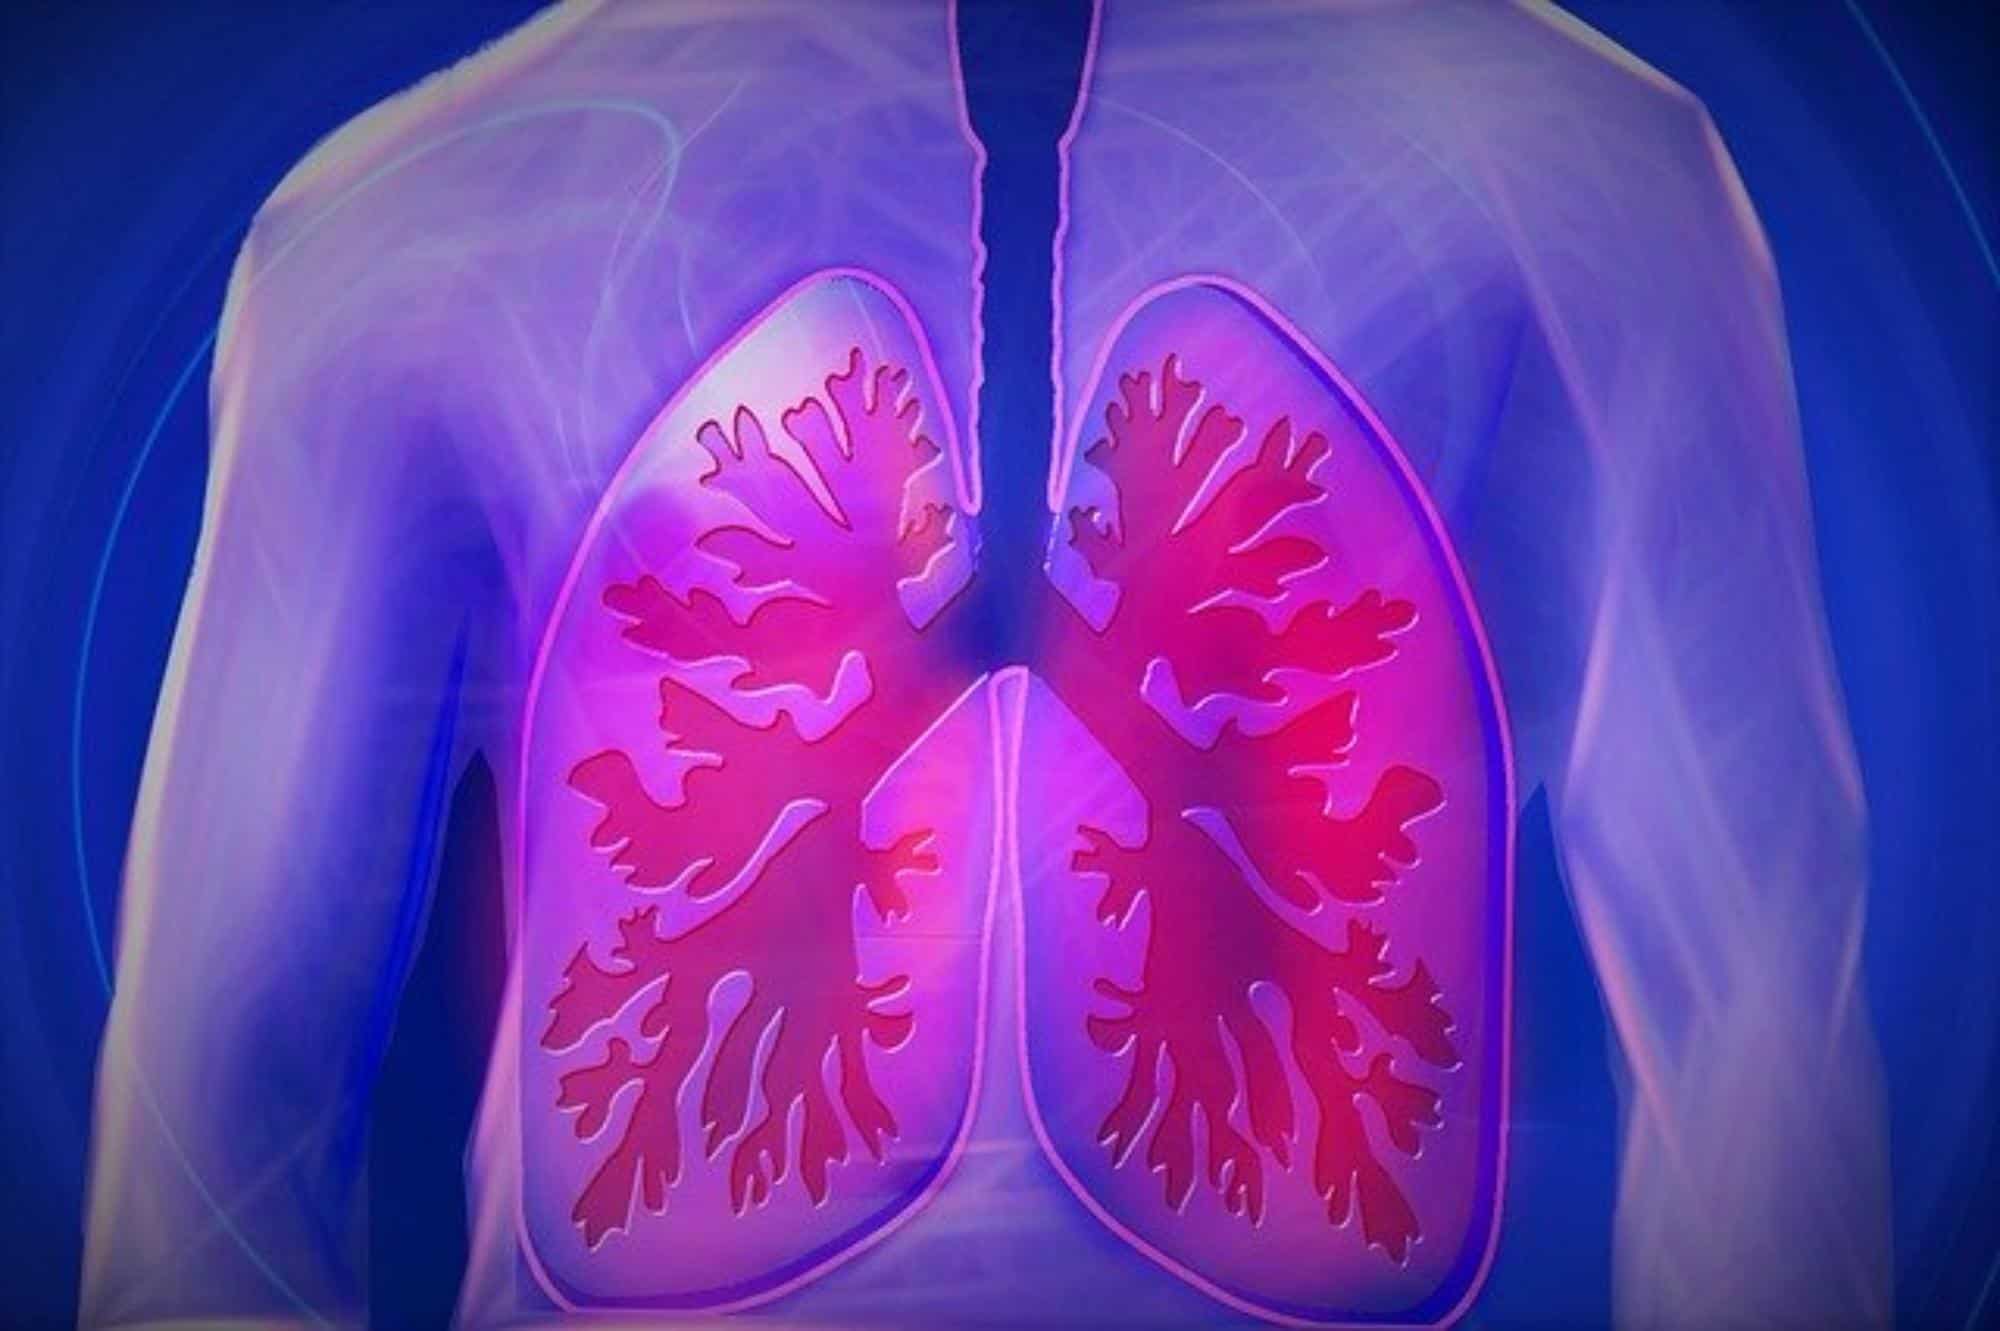 TB is a contagious lung infection